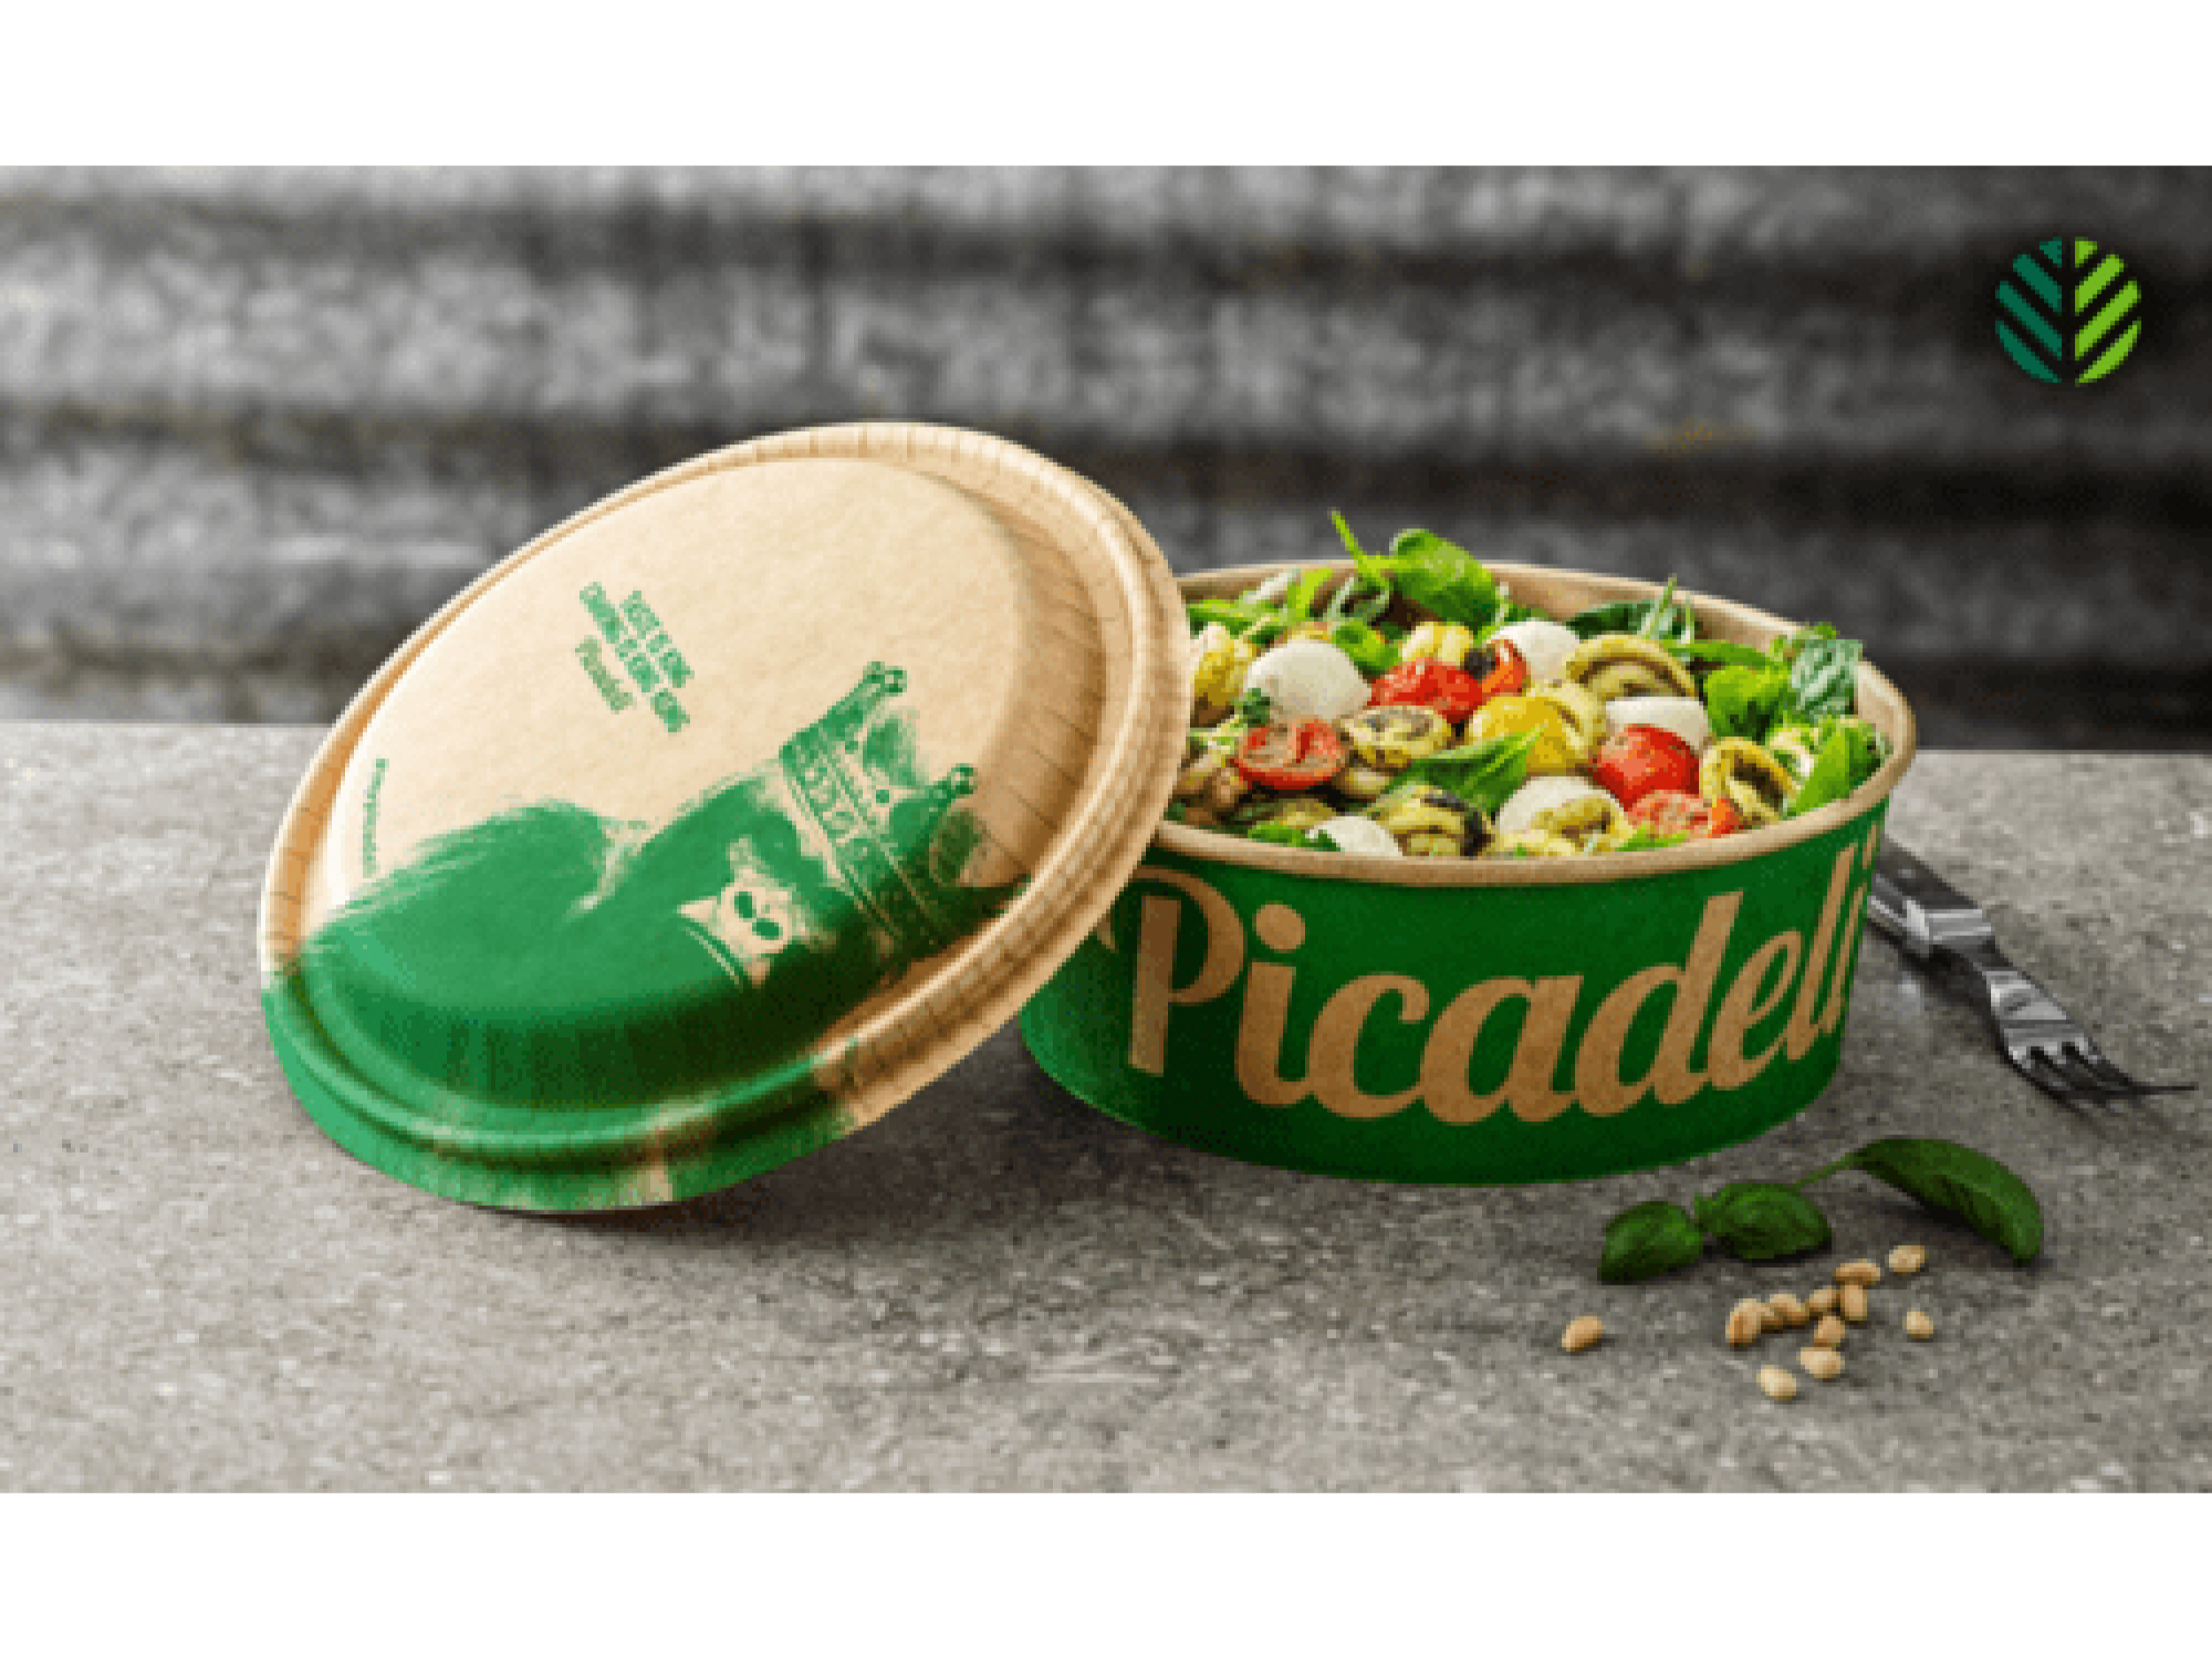 Graphic Packaging International partners with Picadeli to develop a new range of plastic-free paperboard lids for its paper-based salad bowls.